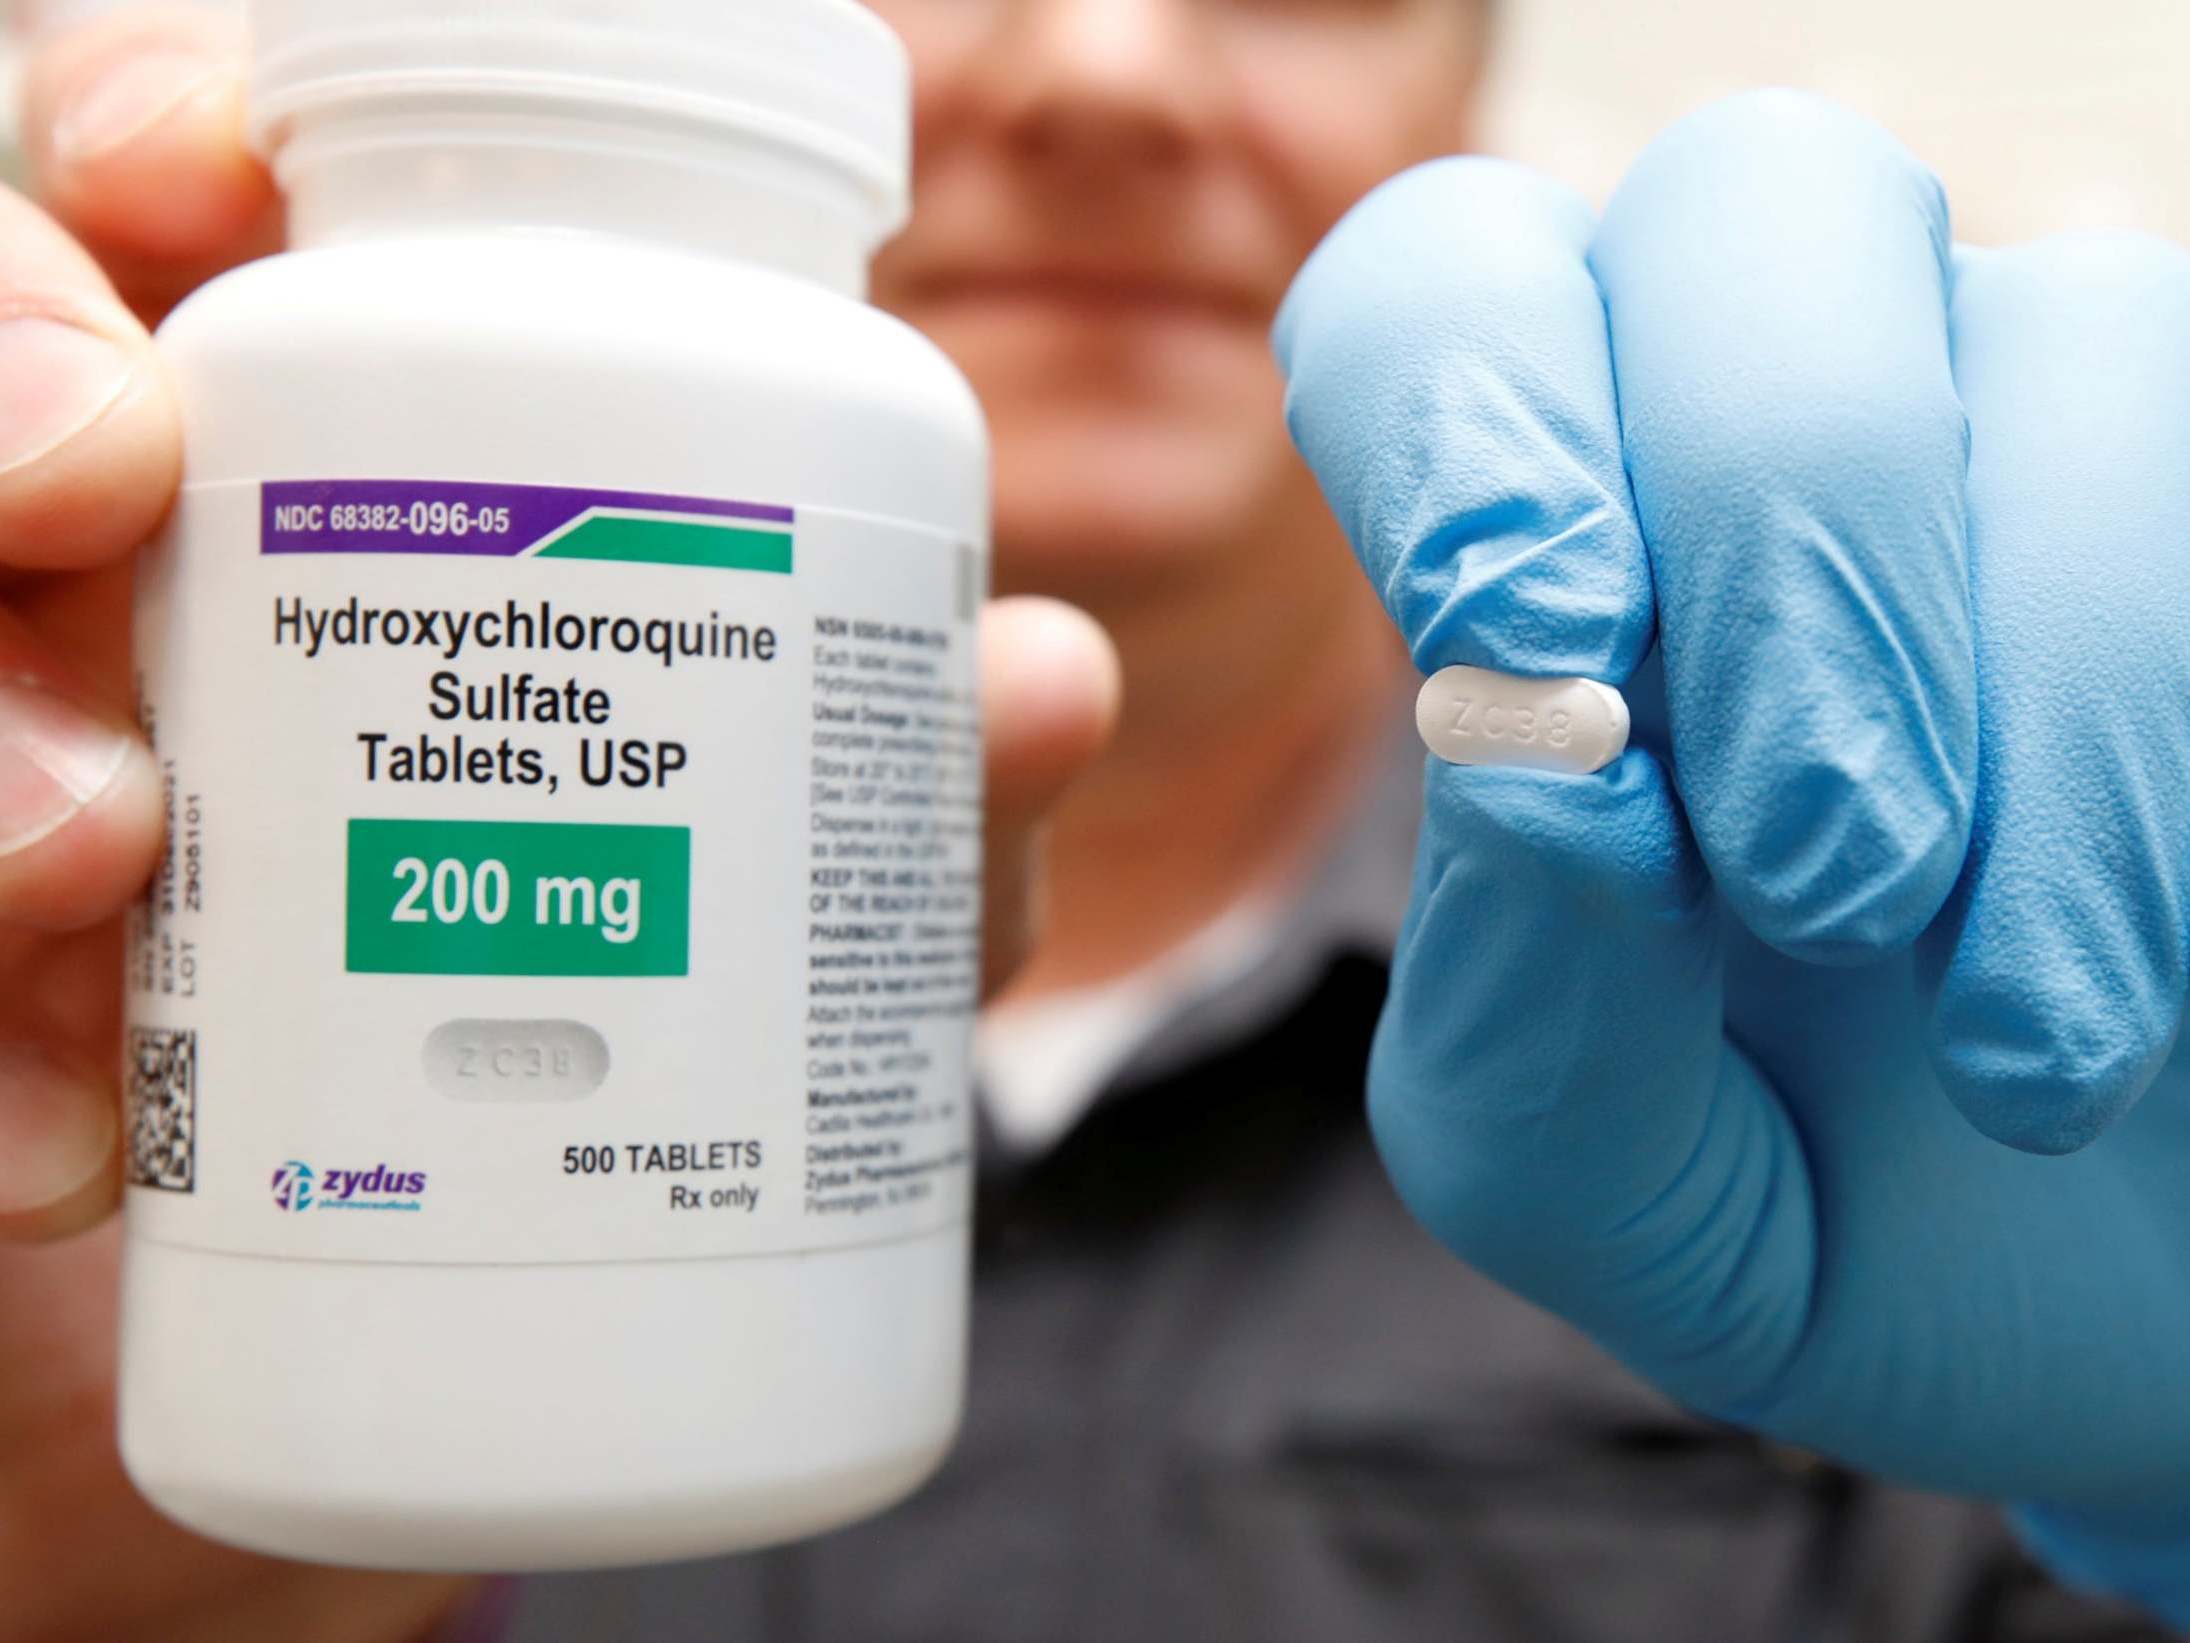 Trials for hydroxychloroquine, a drug repeatedly touted by Donald Trump as a possible treatment for coronavirus, have resumed after The Lancet retracted a paper which halted them